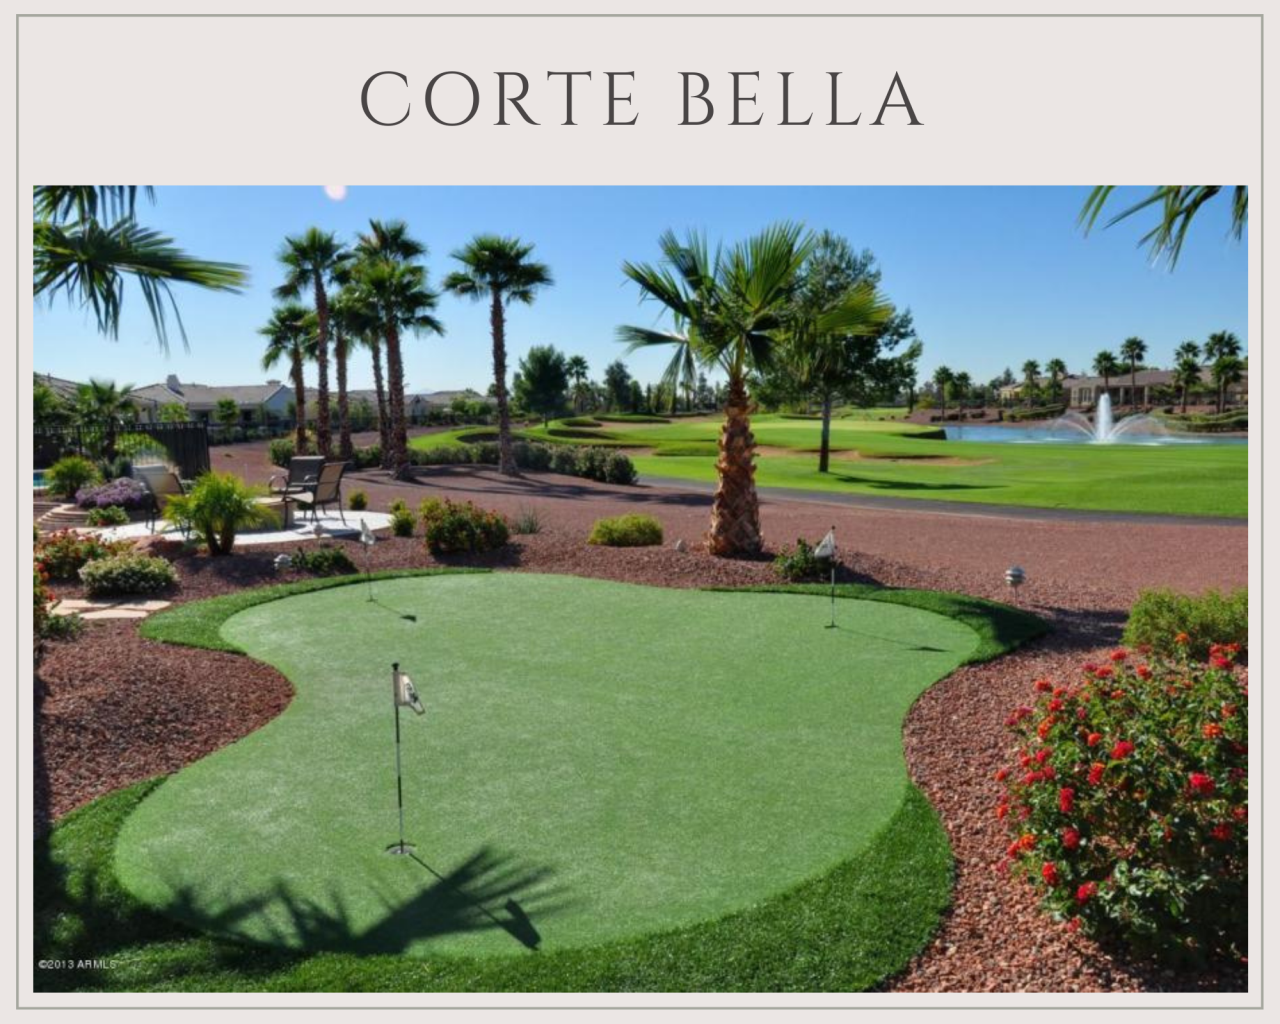 Corte Bella resales real estate and homes for sale